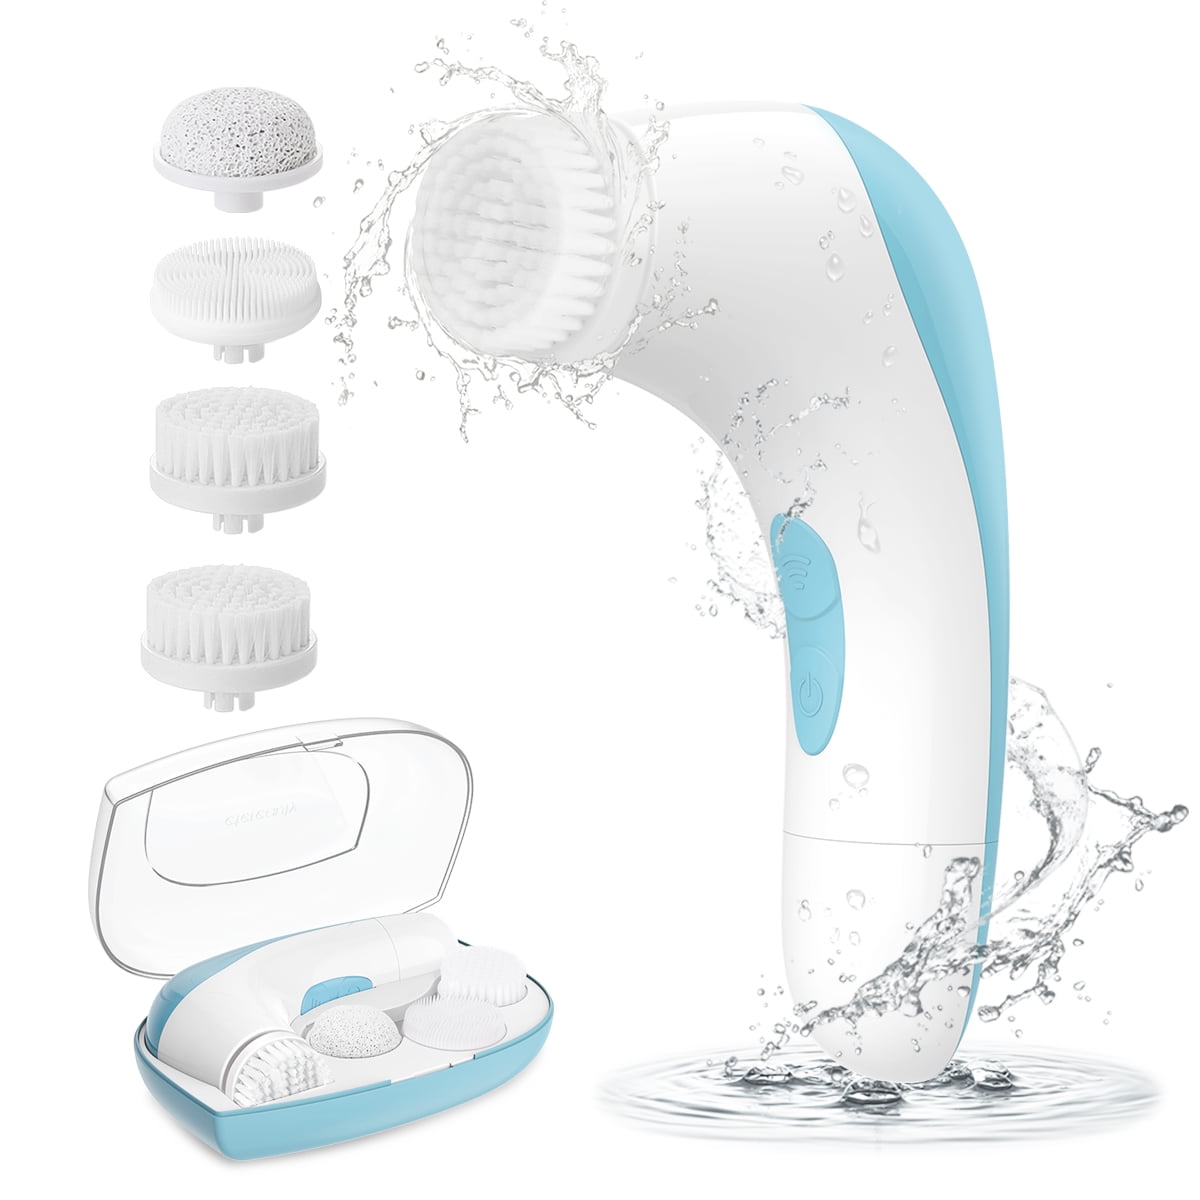 ETEREAUTY 4 in 1 Travelsized Electric Facial Cleaning